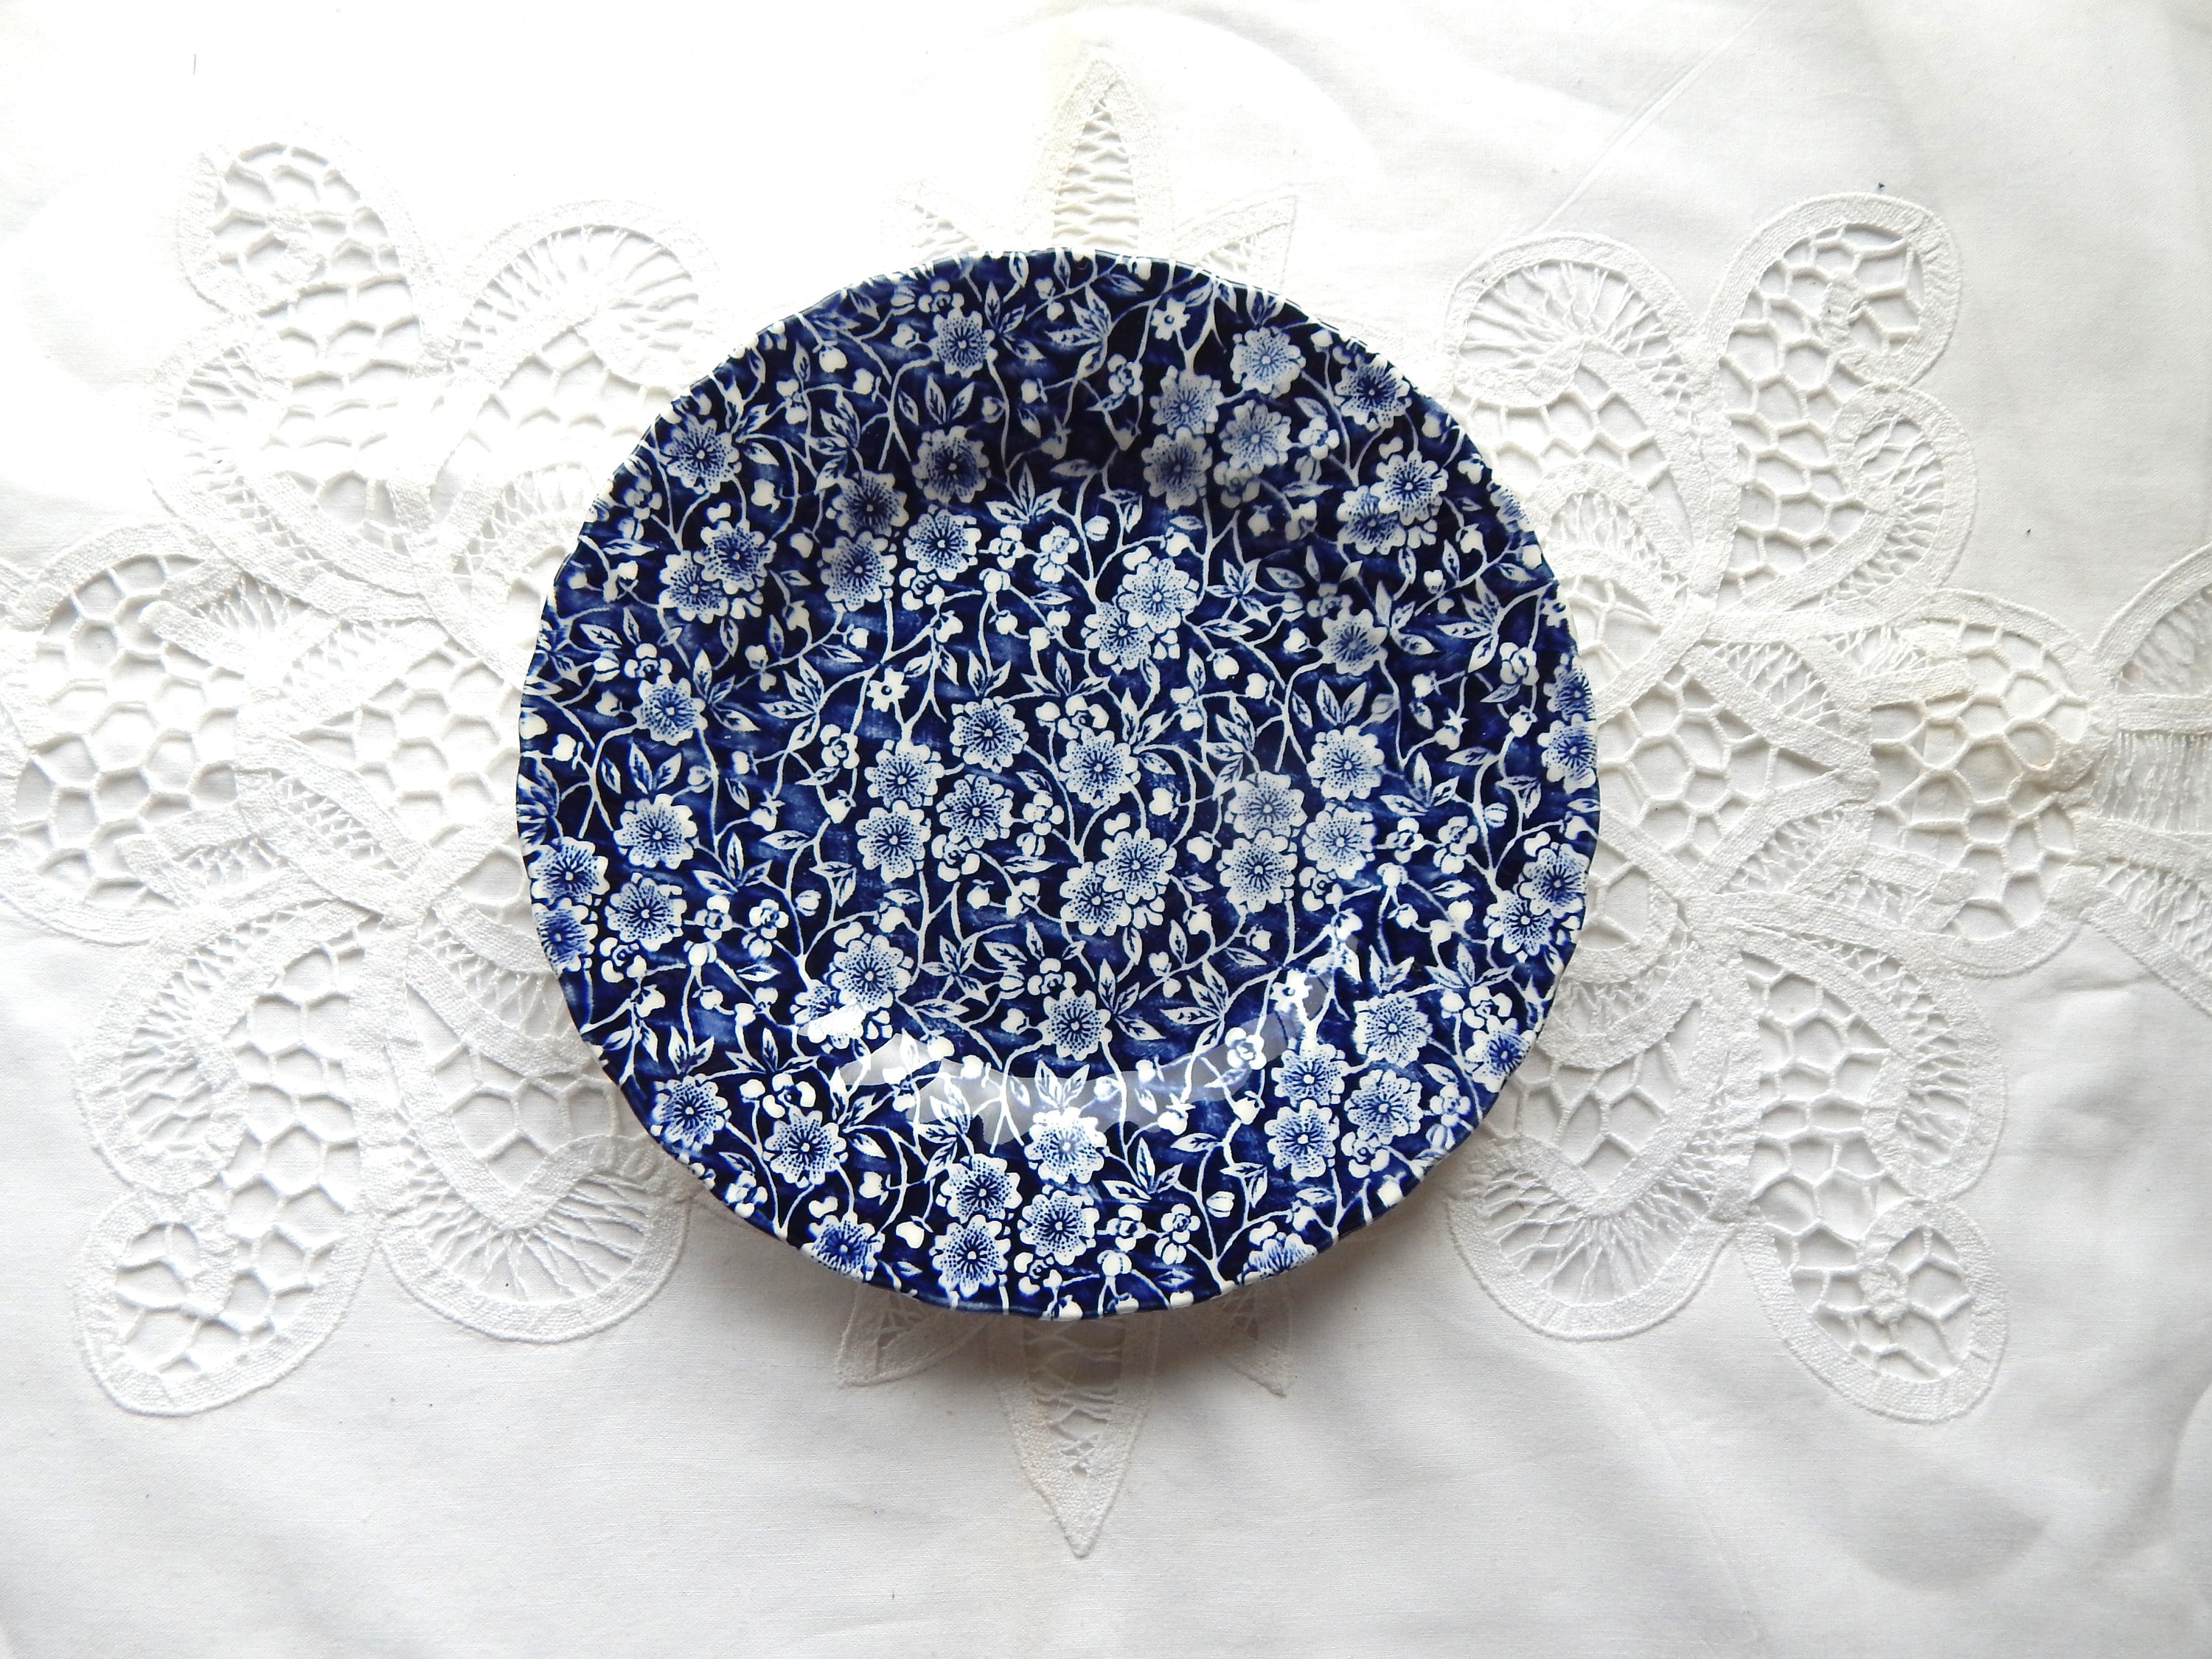 How To Paint Plates With A Doily - Pillar Box Blue